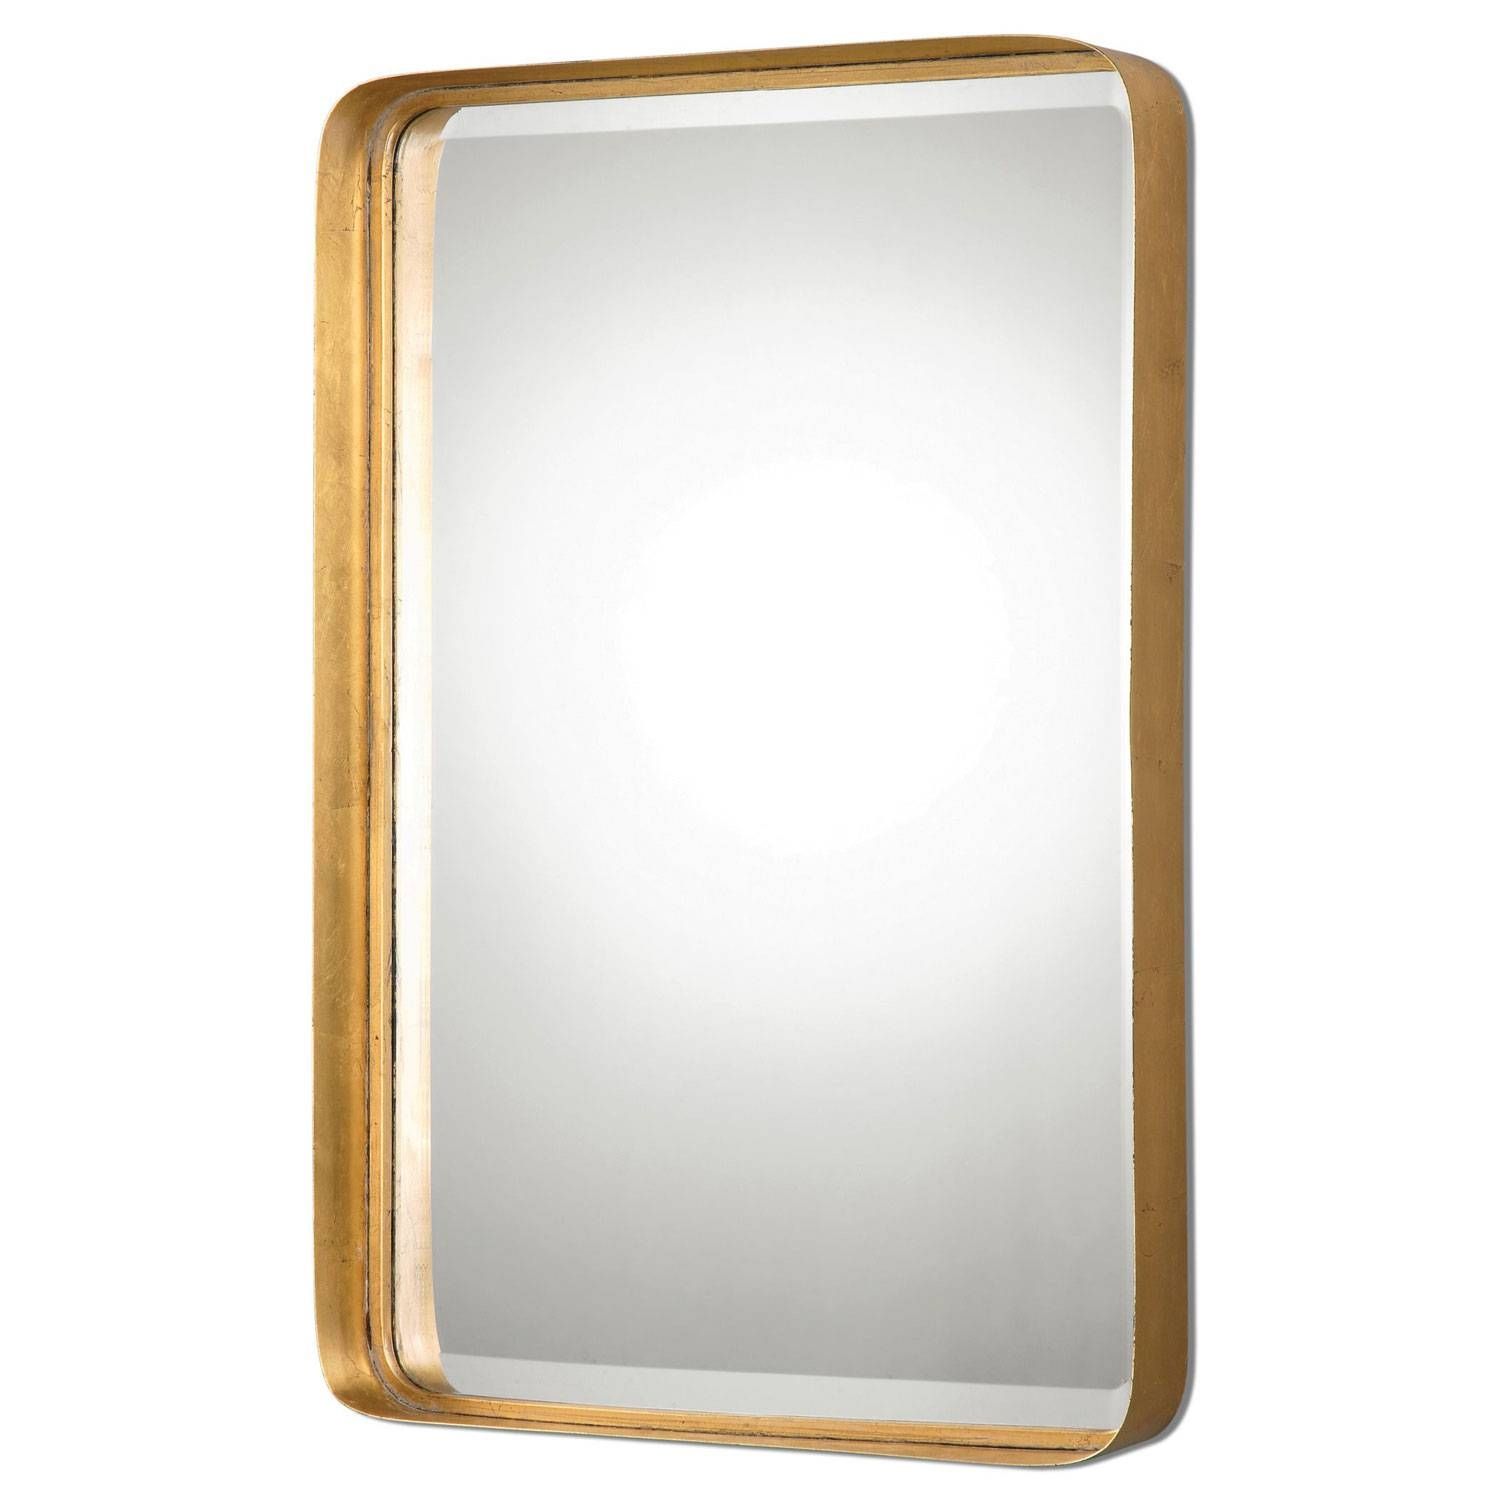 Crofton Antique Gold Mirror Uttermost Wall Mirror Mirrors Home Decor Within Large Antique Gold Mirrors (View 11 of 25)